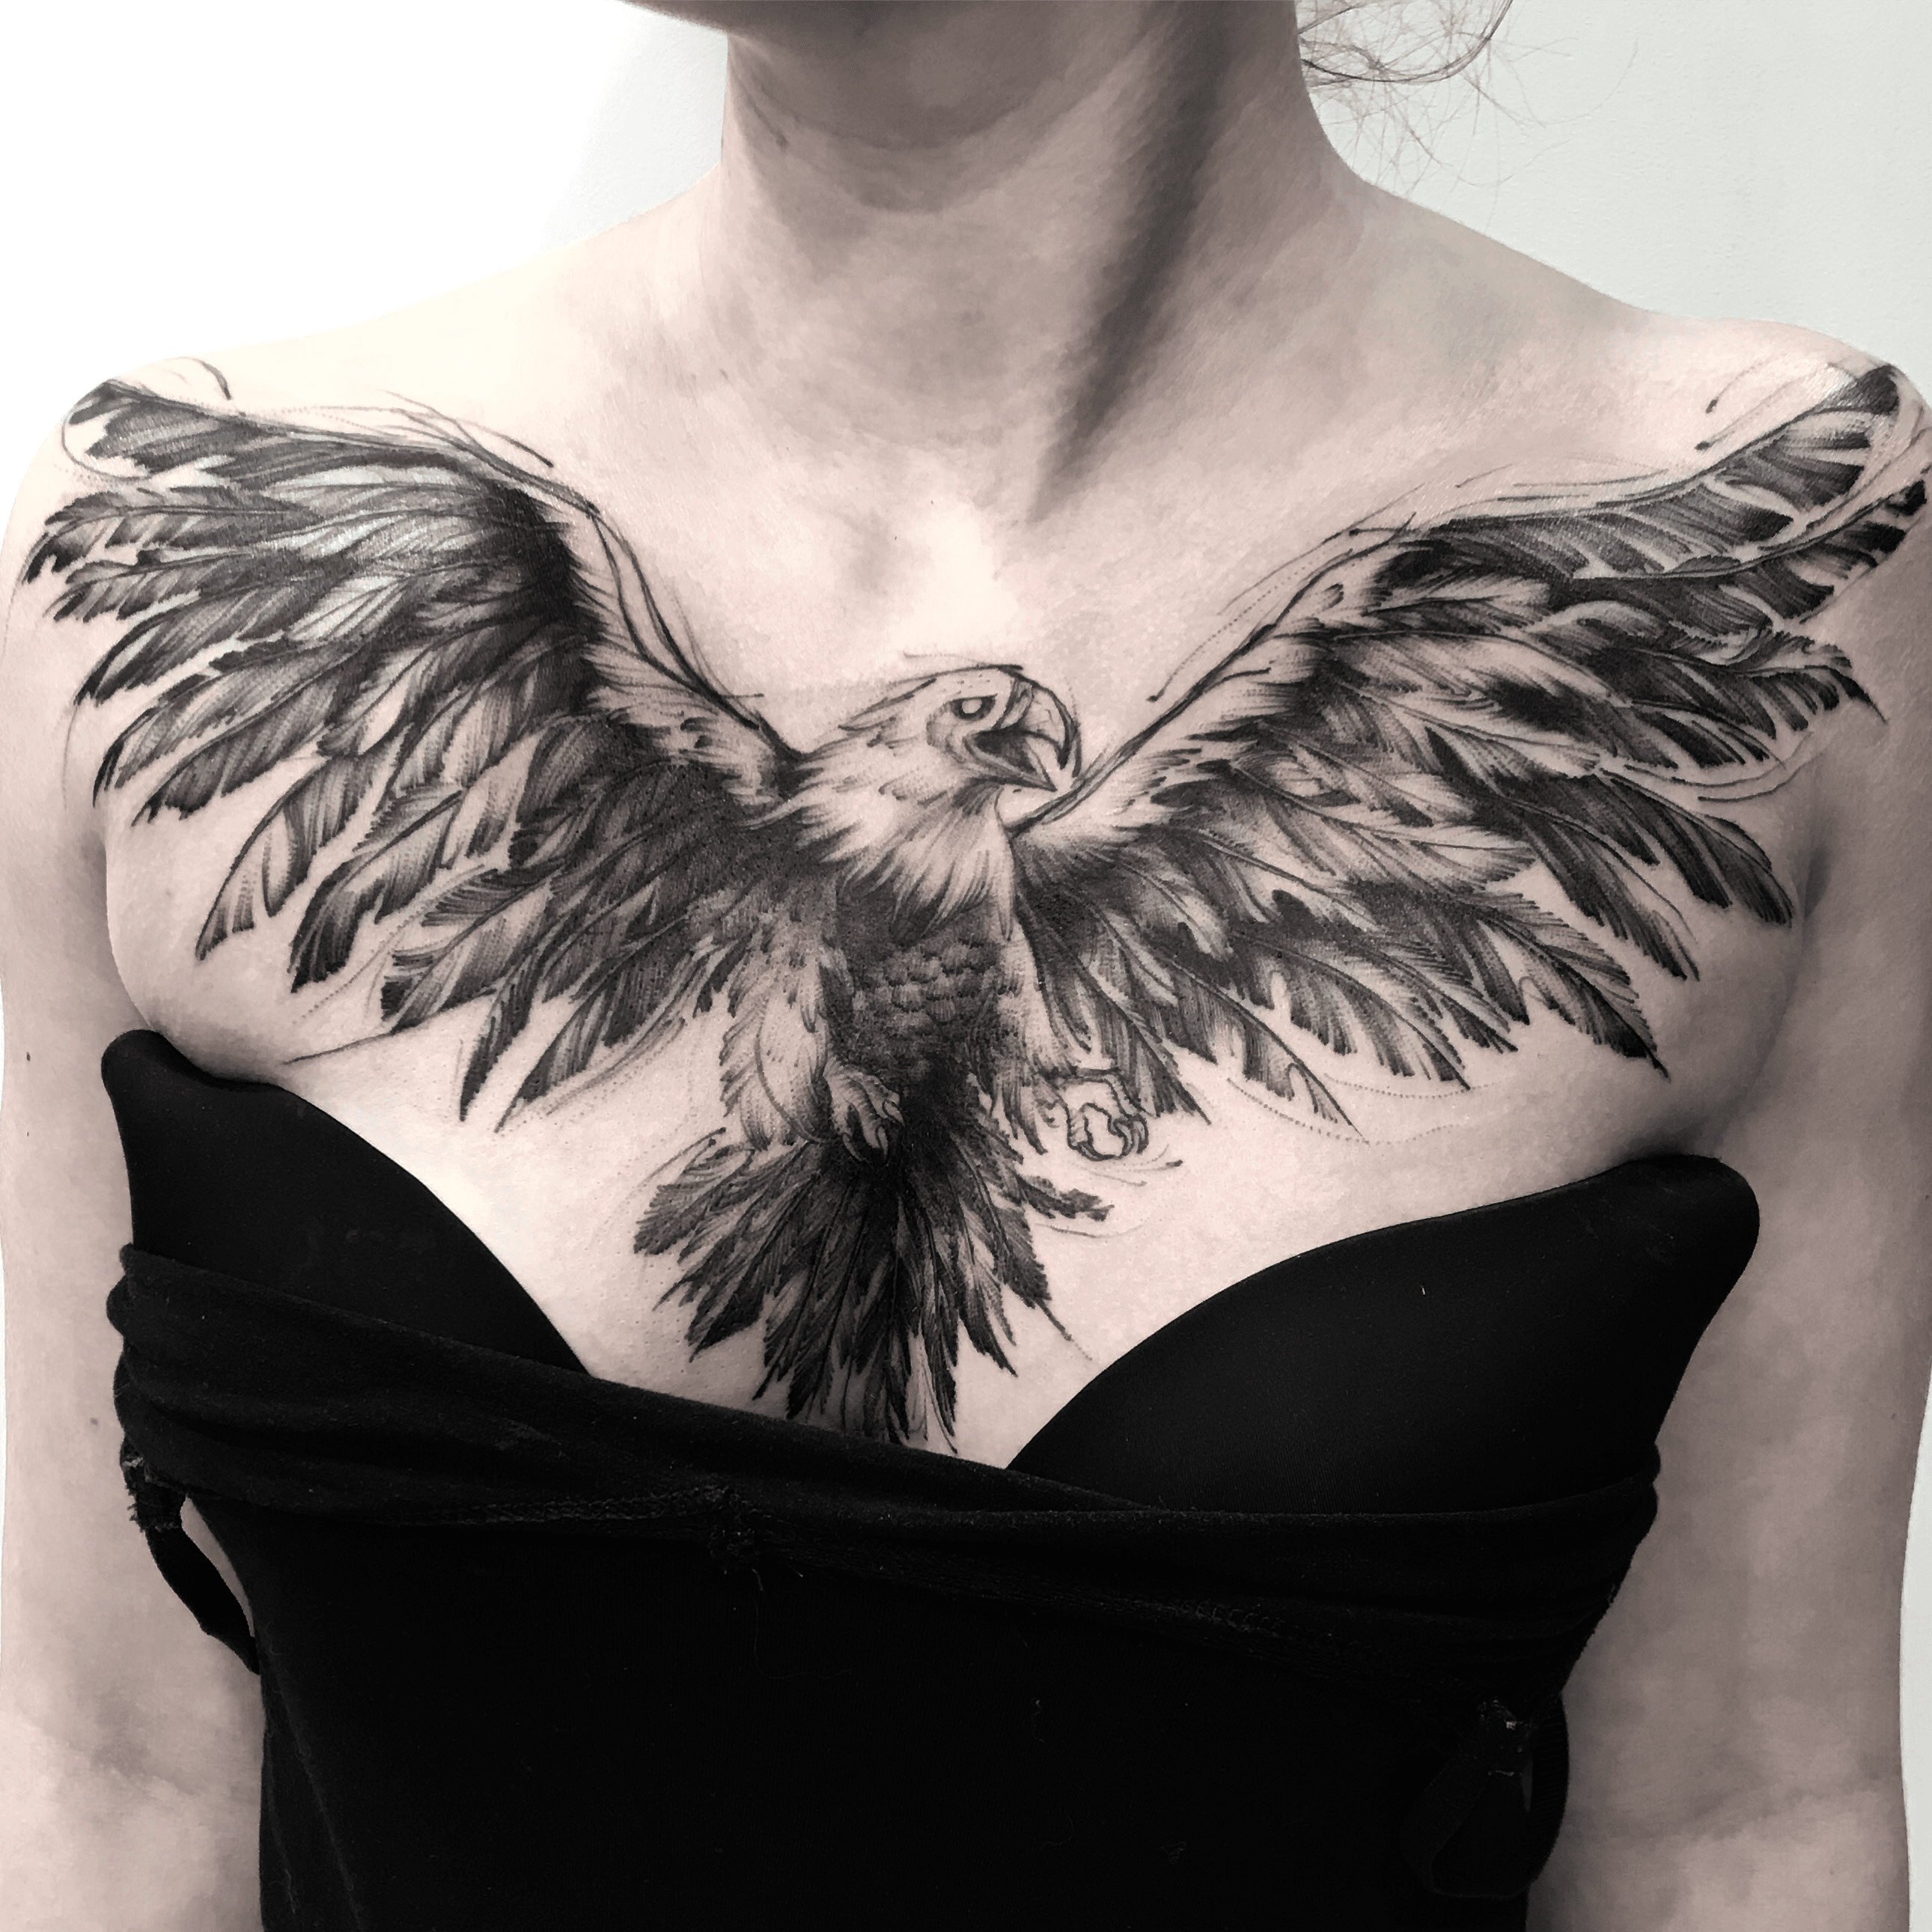 Dev Tattoos  Eagle tattoo Eagle tattoo Done by Dev From Dev tattoos Delhi  India Eagle tattoo making in 2d category in the single Black color Only  2dtattoo eagle eagletattoos eagletattoodesign plain 